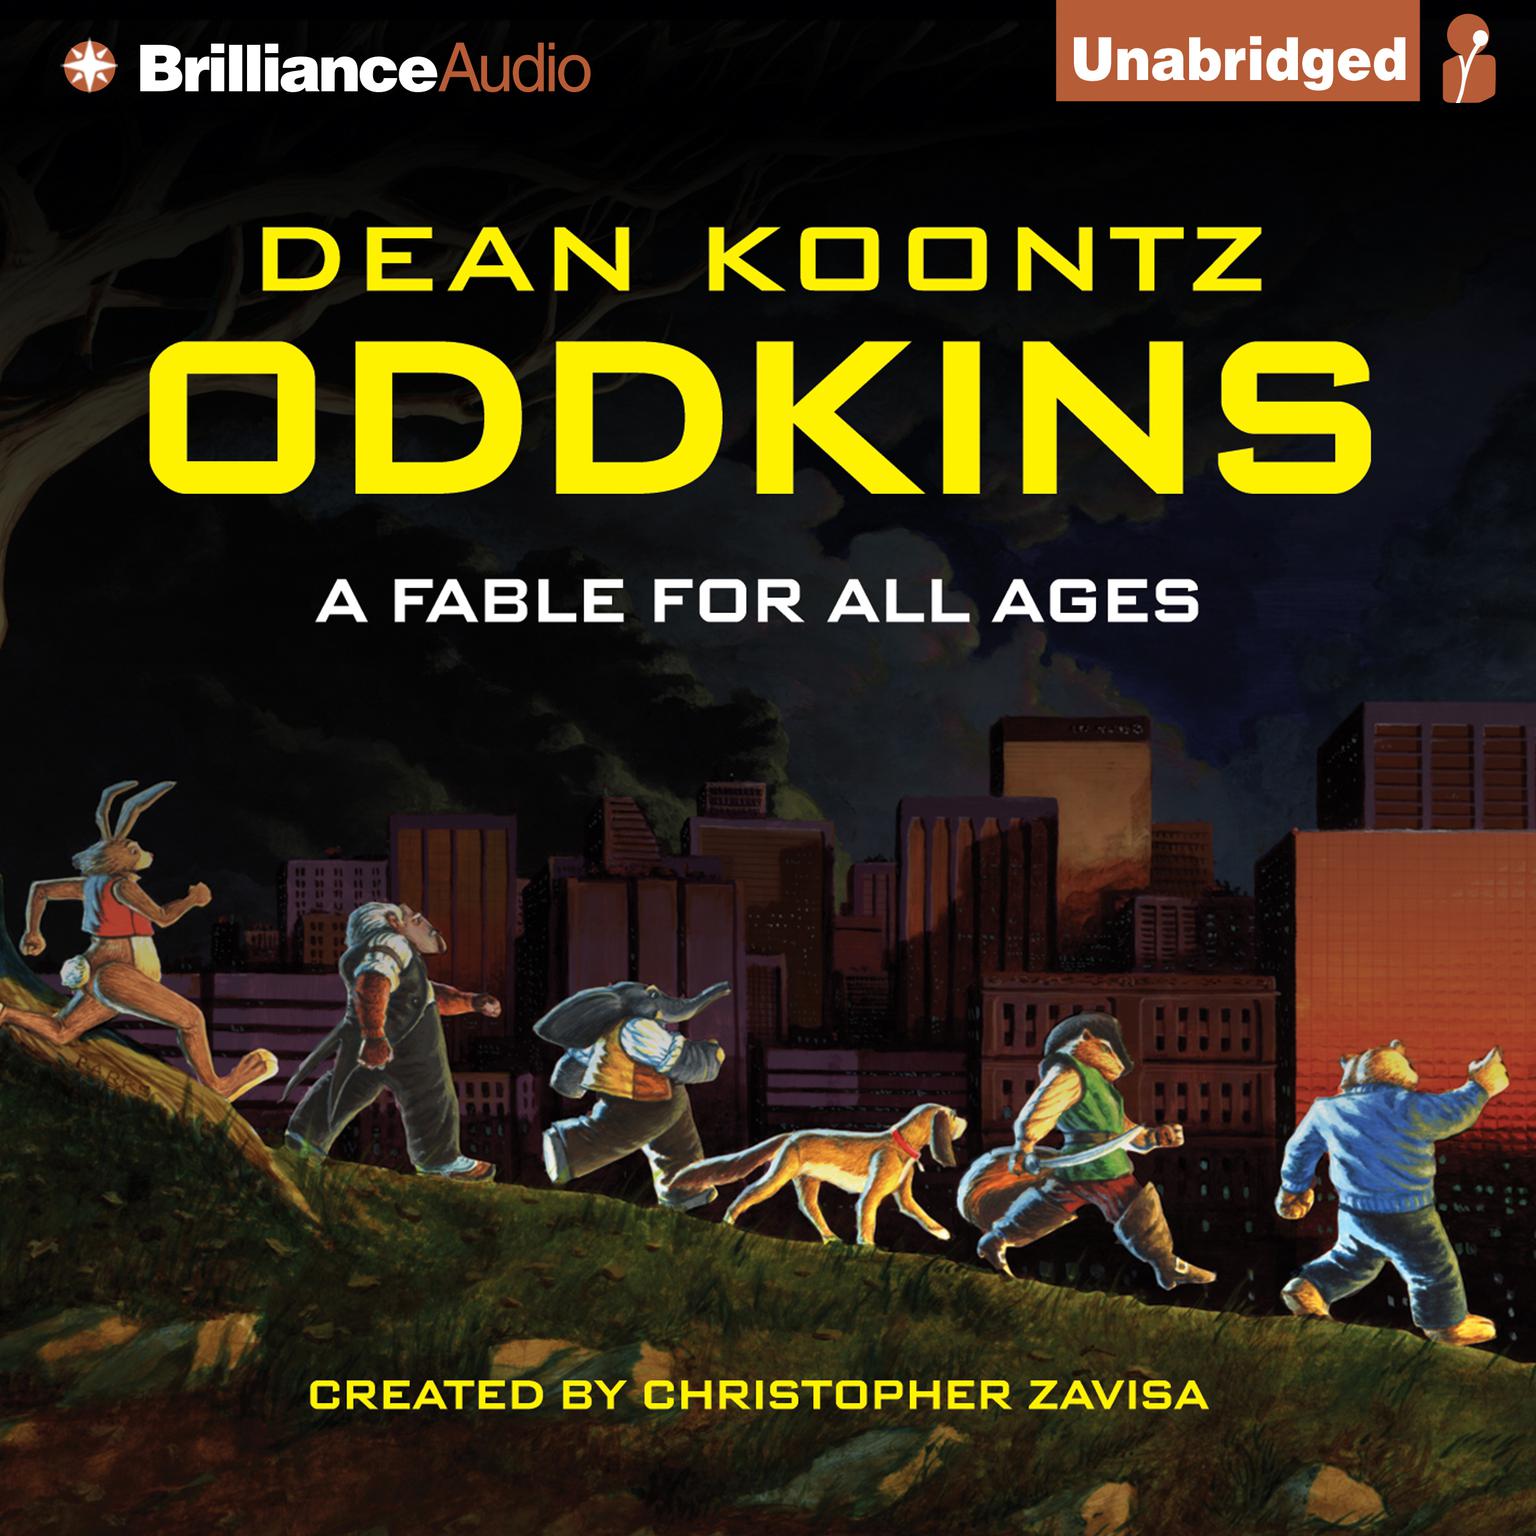 Oddkins: A Fable for All Ages Audiobook, by Dean Koontz